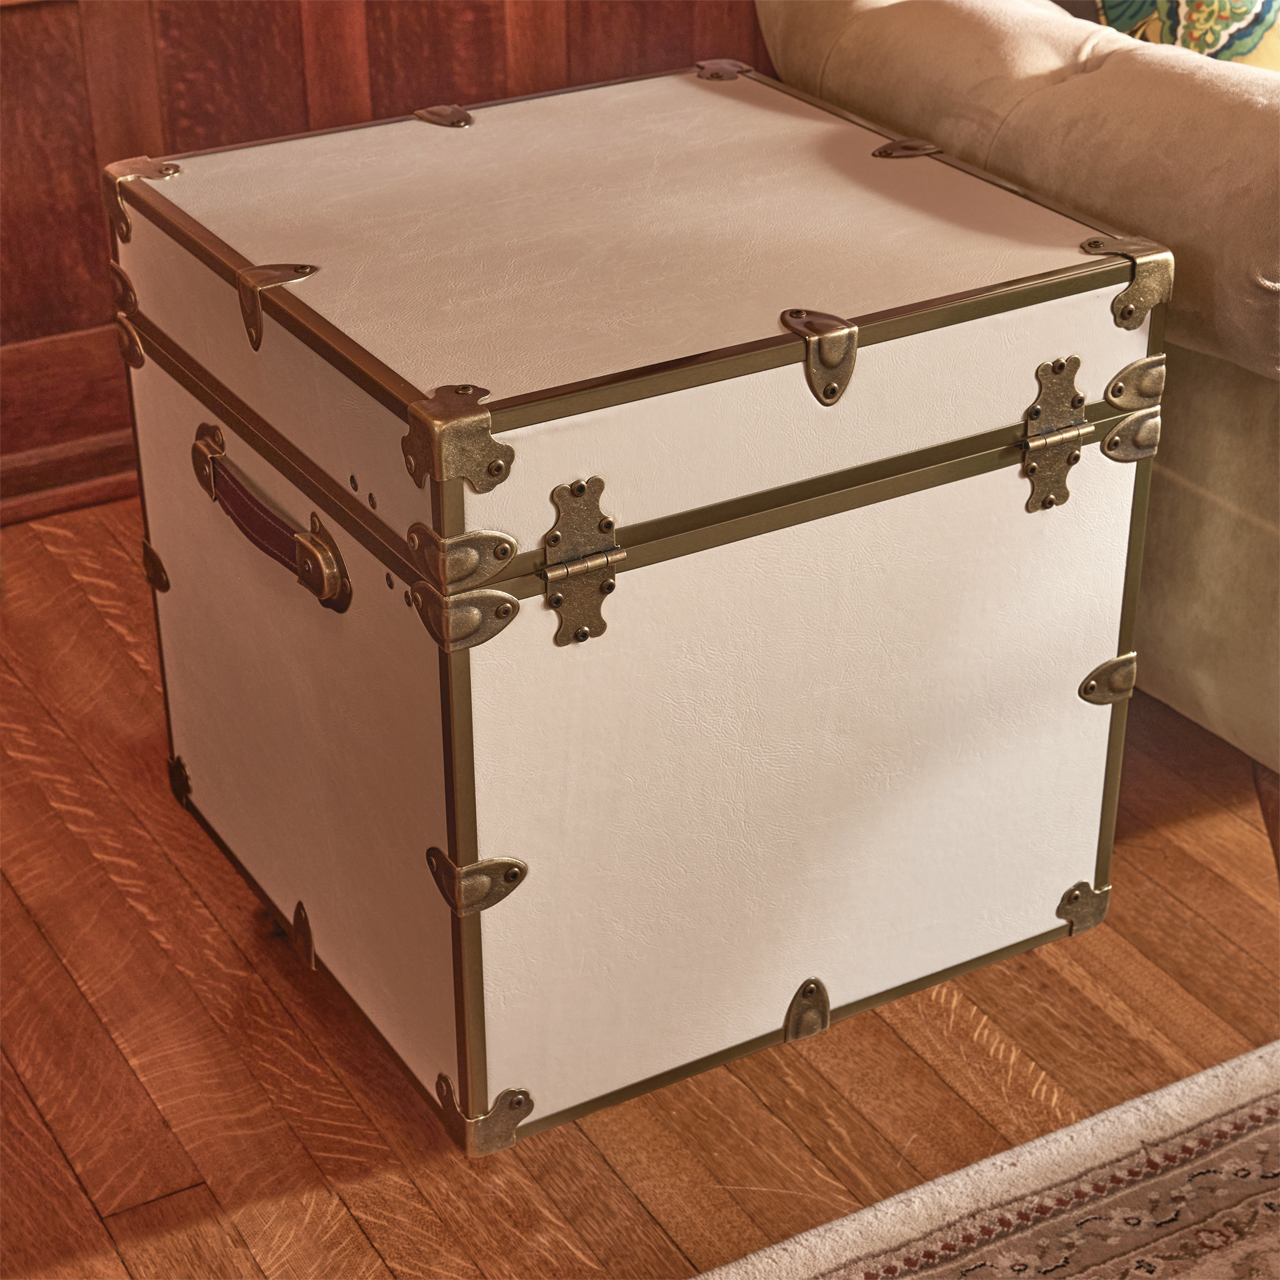 Rhino Luxury Faux Leather Coffee Table Trunk With Feet